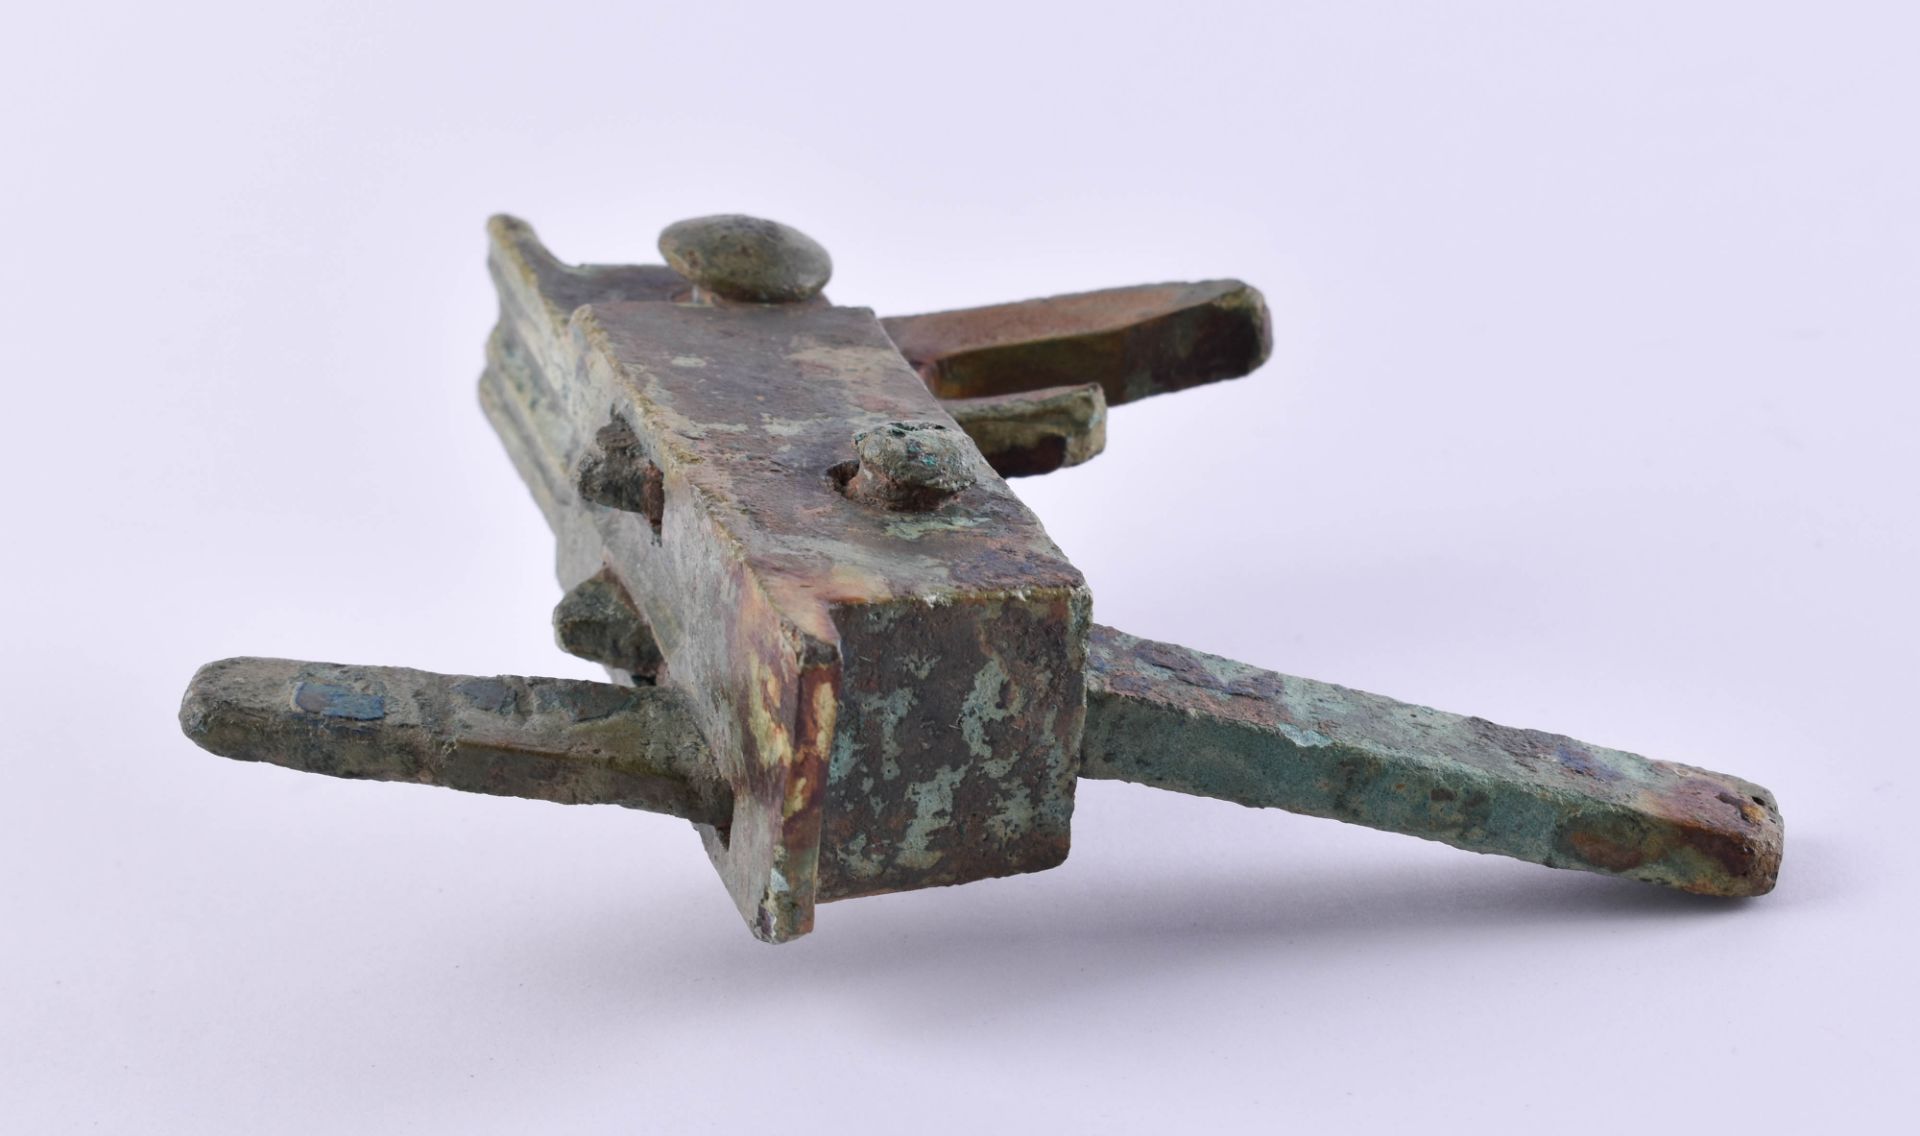  Trigger mechanism crossbow China Han dynasty - Image 3 of 5